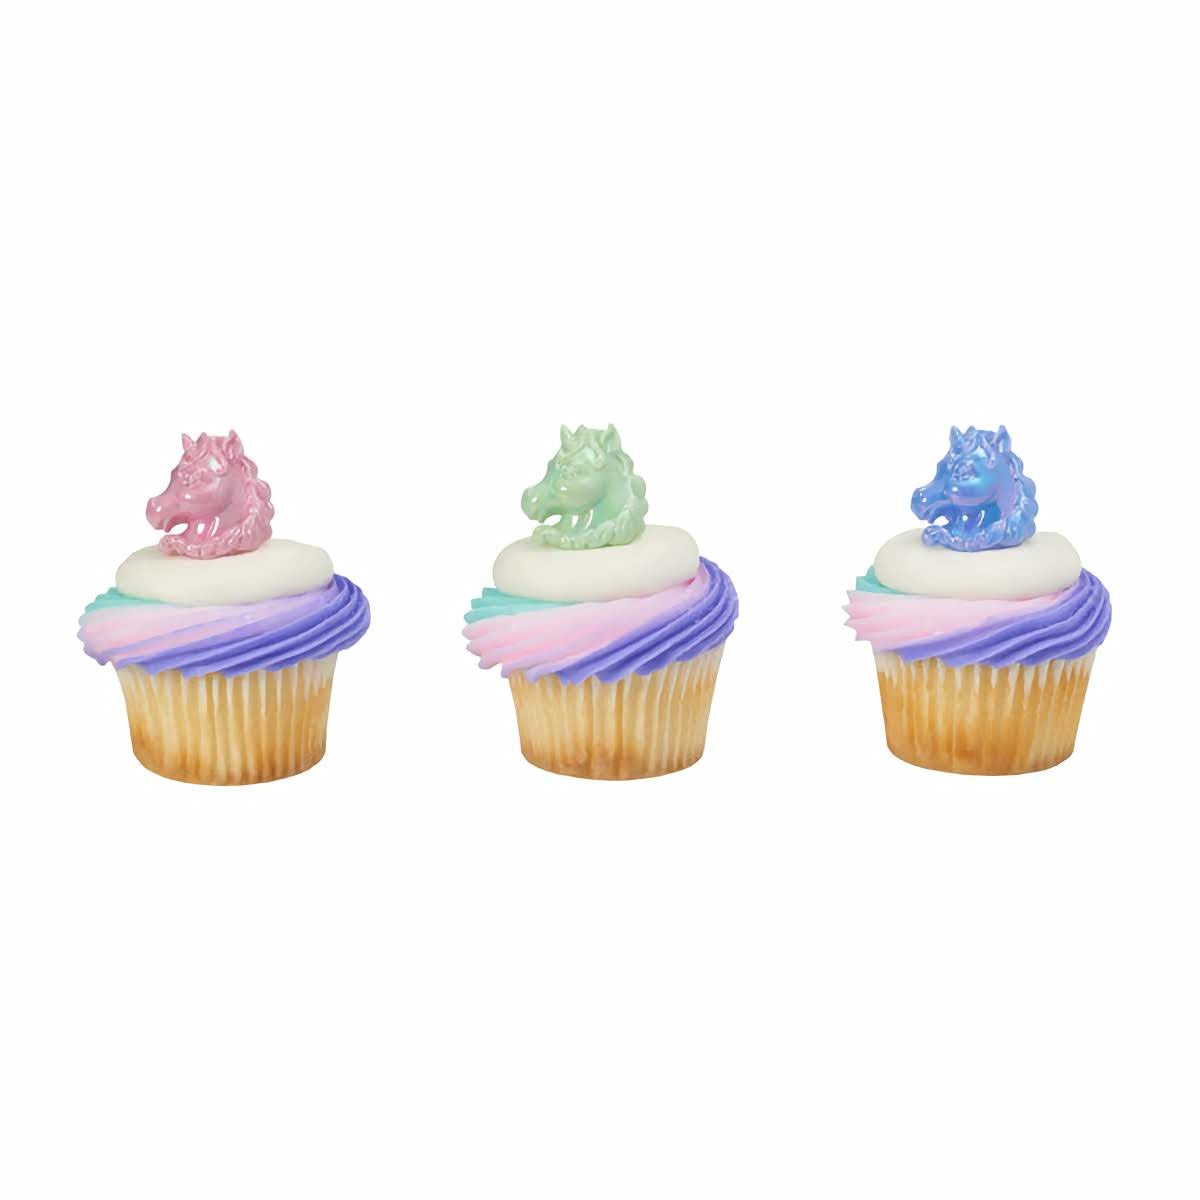 Colorful unicorn head cupcake topper rings, adding a fantastical element to cupcakes and treats, a creative topping available at Lynn's Cake, Candy, and Chocolate Supplies.